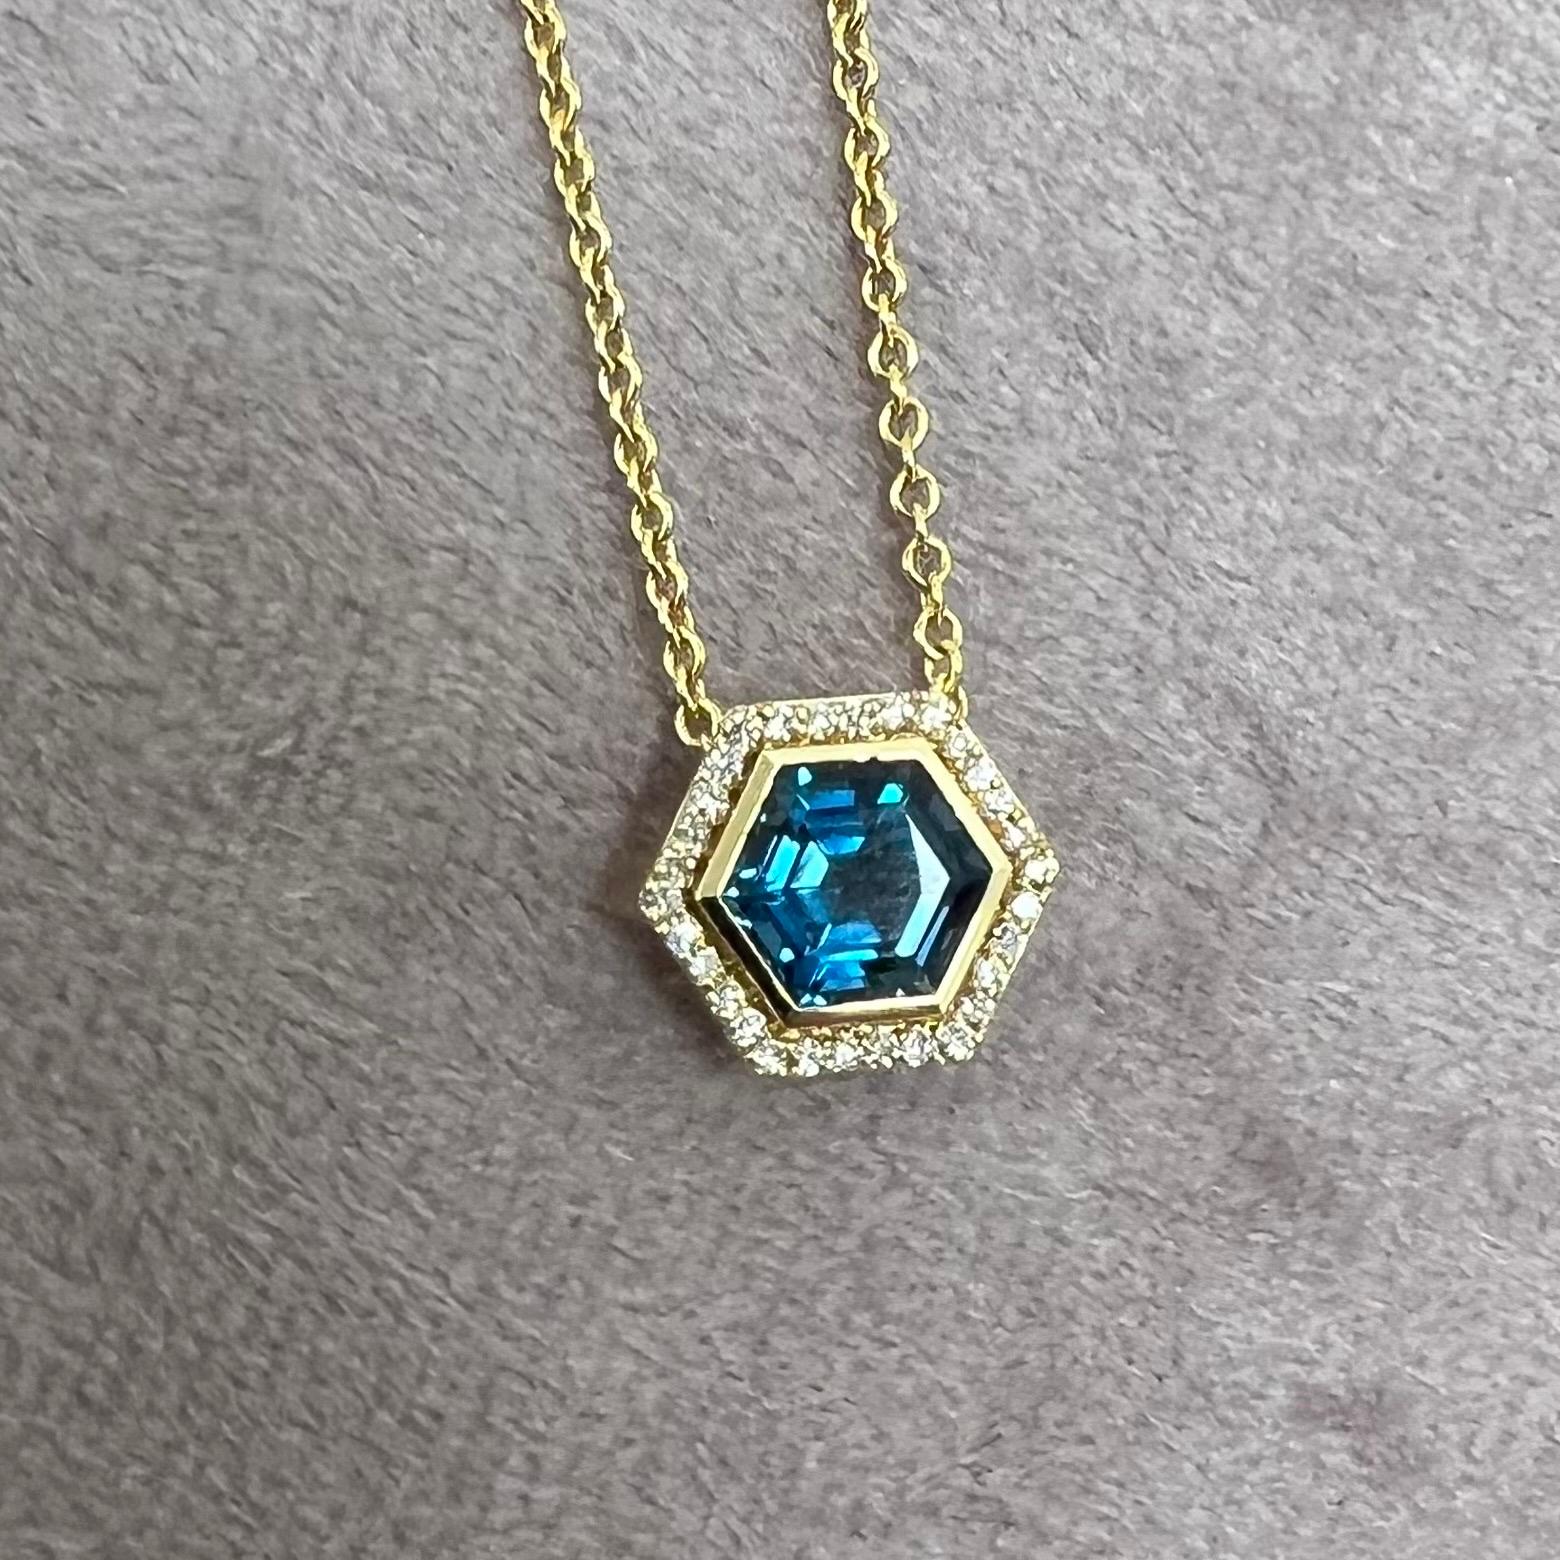 Created in 18 karat yellow gold
London blue topaz 1.50 carats approx.
Diamonds 0.15 carat approx.
18 inch, adjustable at 16-17
Limited edition

Exquisitely crafted from 18 karat yellow gold, this limited edition pendant features a stunning London